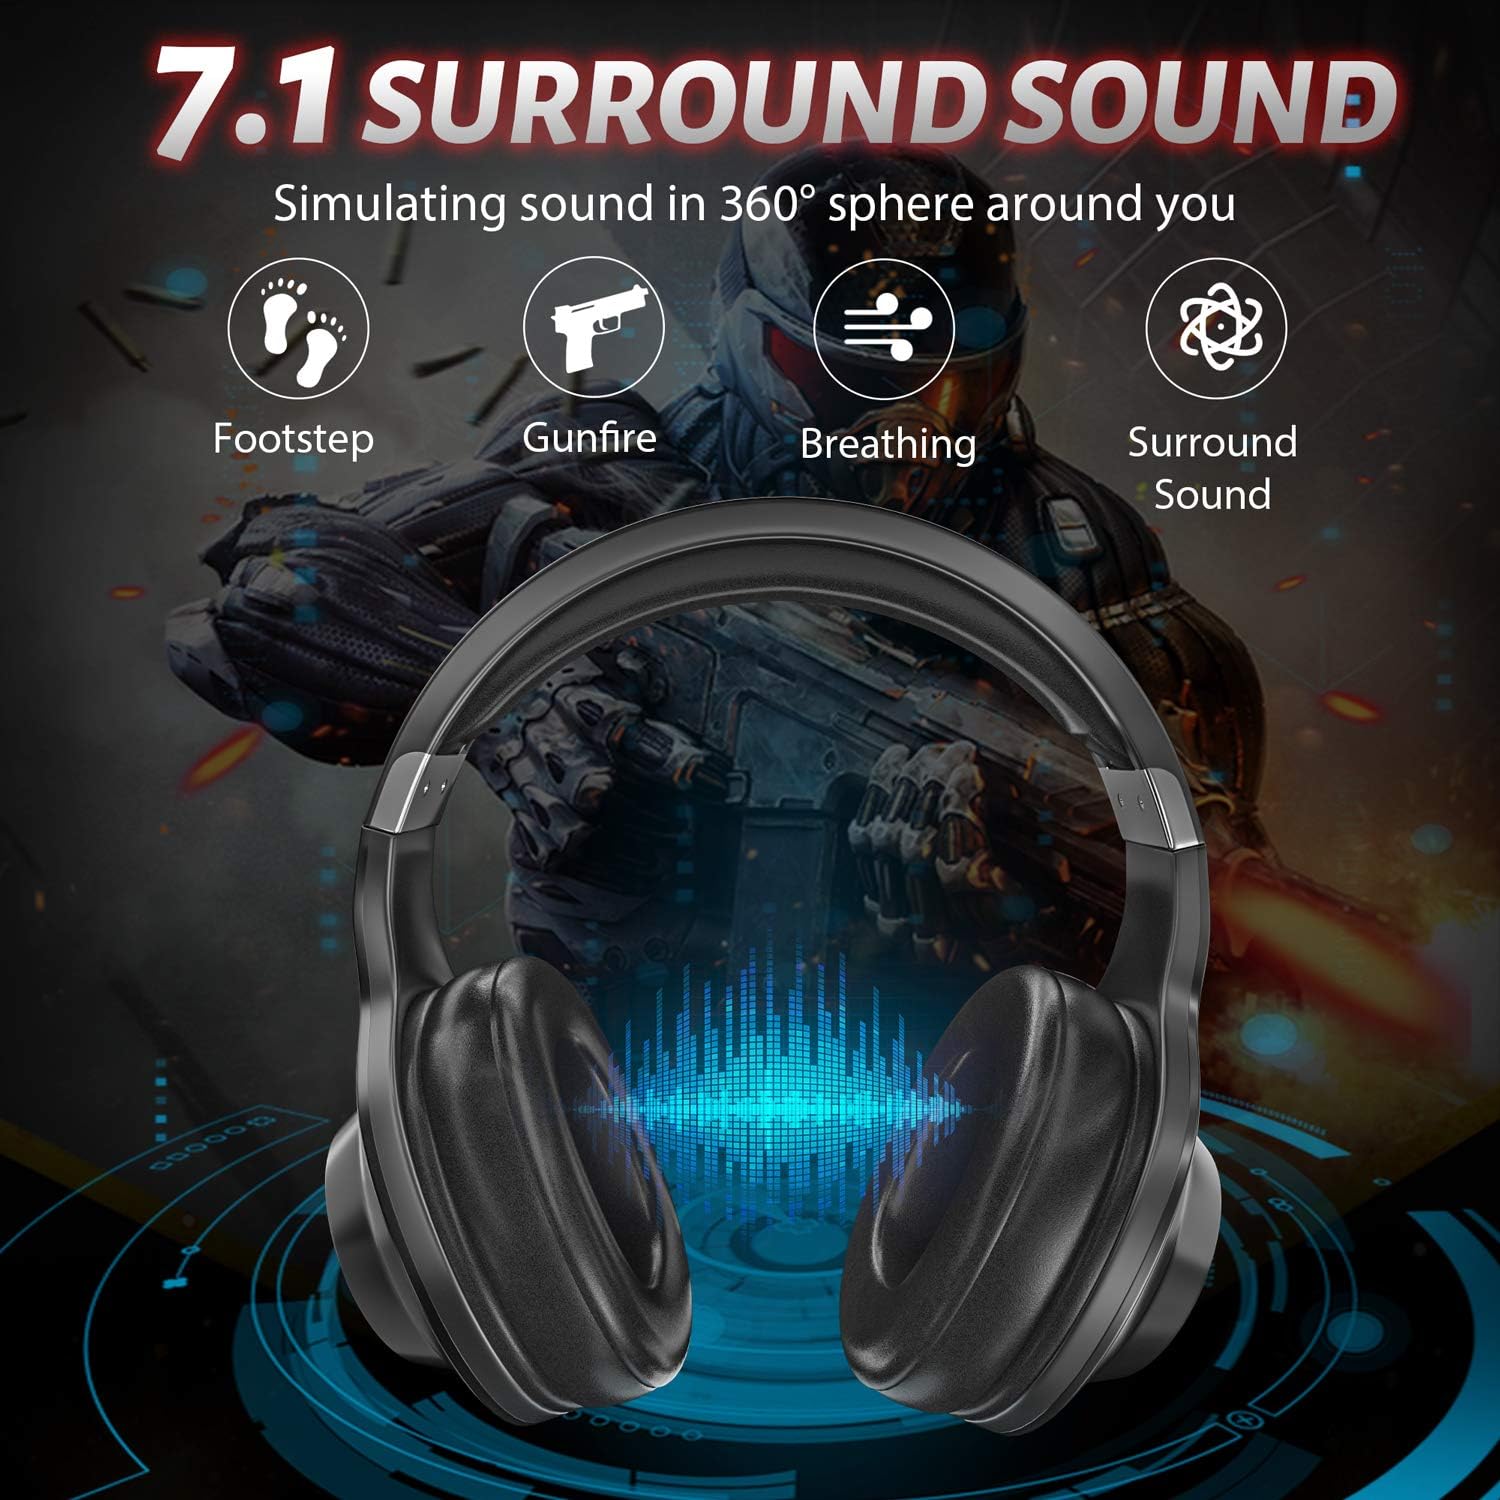 Wired Gaming Headset G2